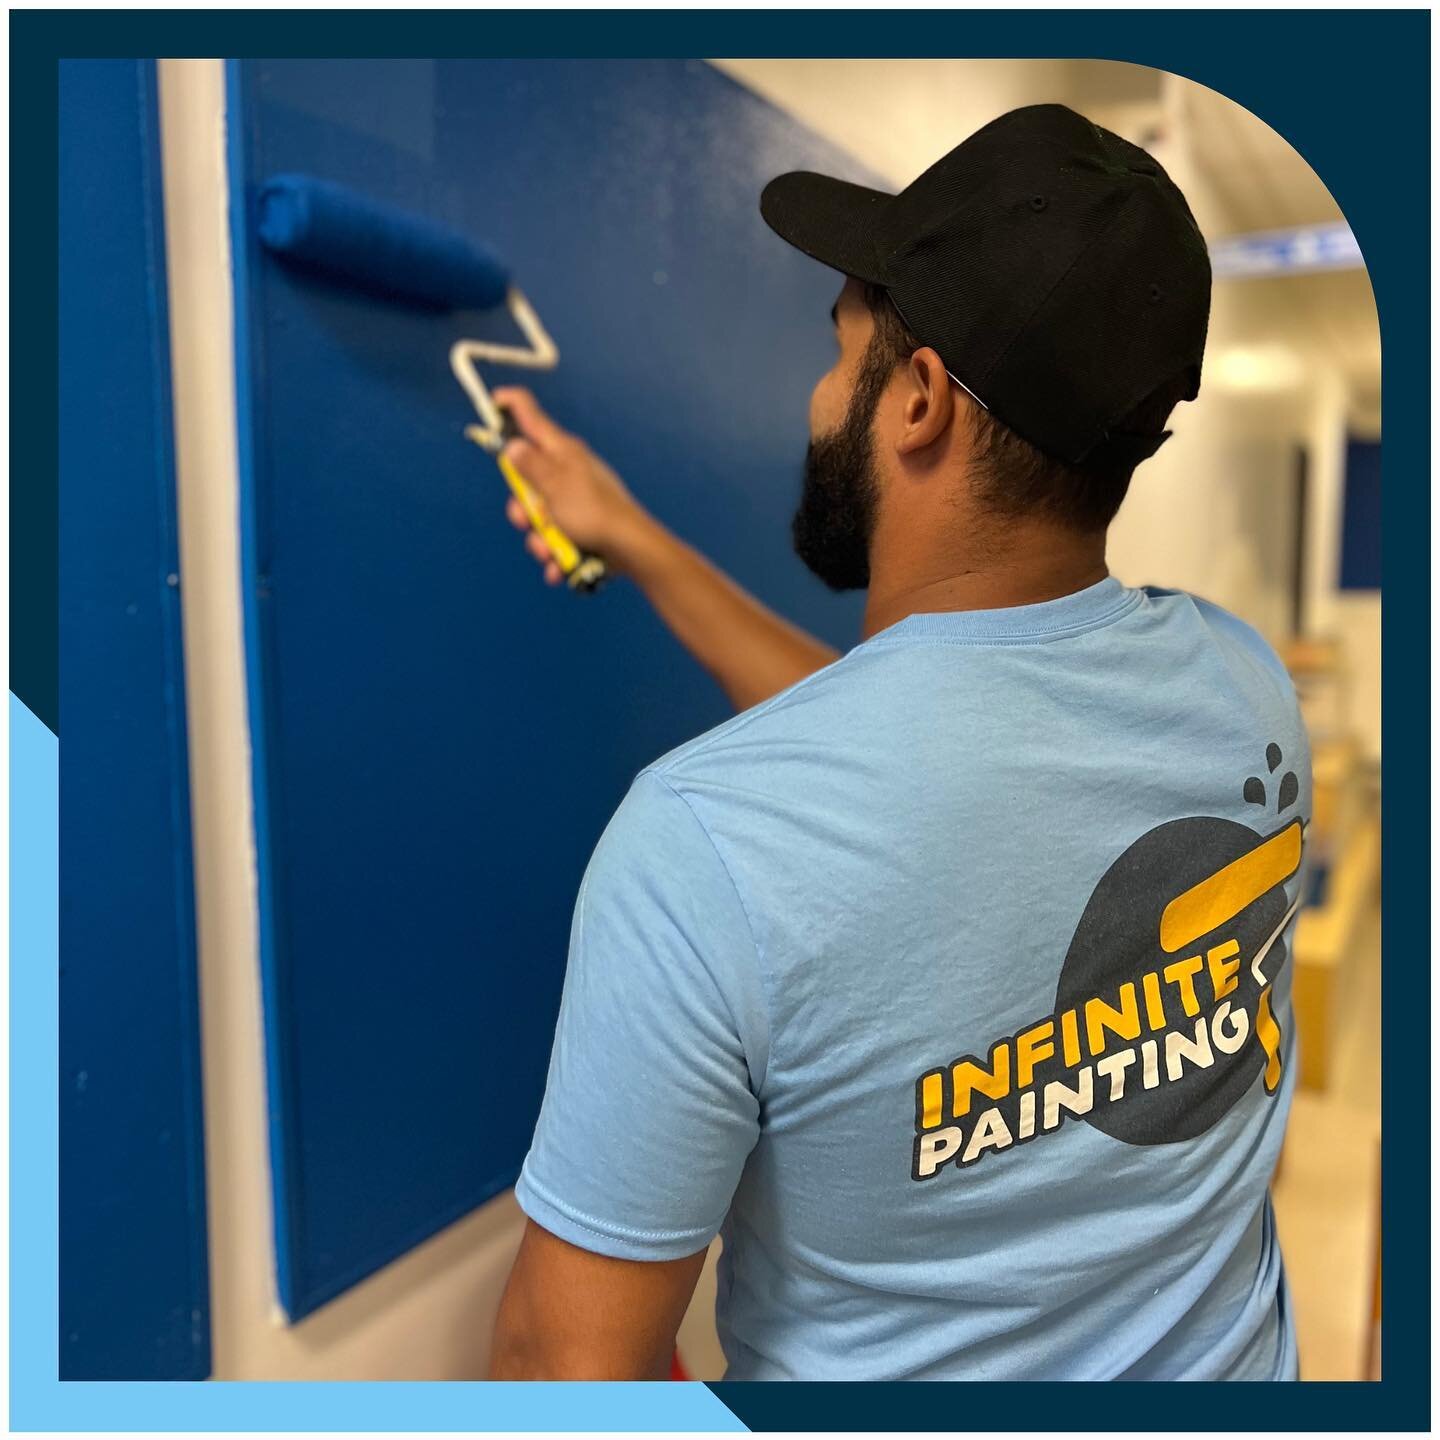 Rollin&rsquo; through the week.

Contact Us Today:
(437) 747-8266
contact@infinitepainting.ca

Toronto&rsquo;s Residential Painters
𝘿𝙤𝙣𝙚 𝙒𝙞𝙩𝙝 𝙄𝙣𝙛𝙞𝙣𝙞𝙩𝙚 𝙇𝙤𝙫𝙚
Liability + Worker Insurance 
2-YEAR WARRANTY

#torontopainters #torontopa